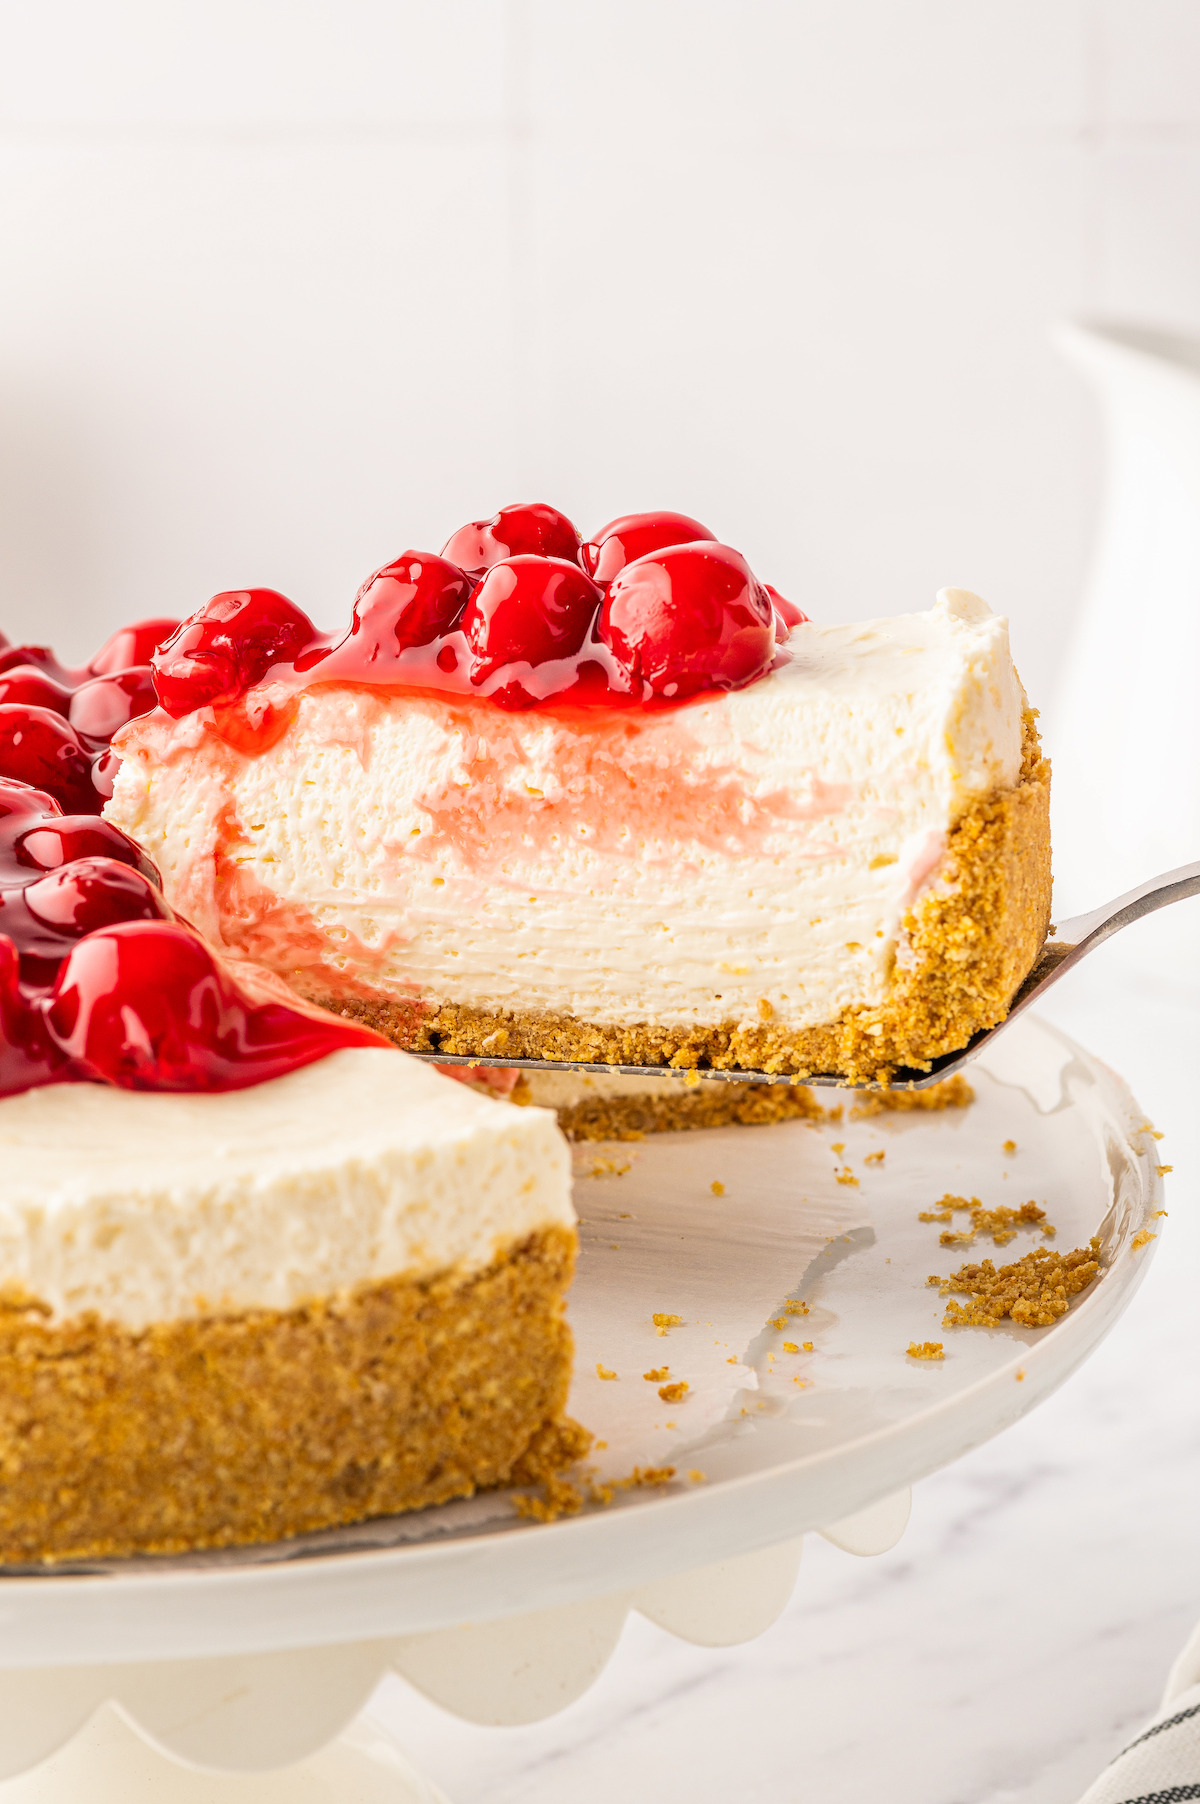 Lifting a slice of no-bake cherry cheesecake with a cake server.